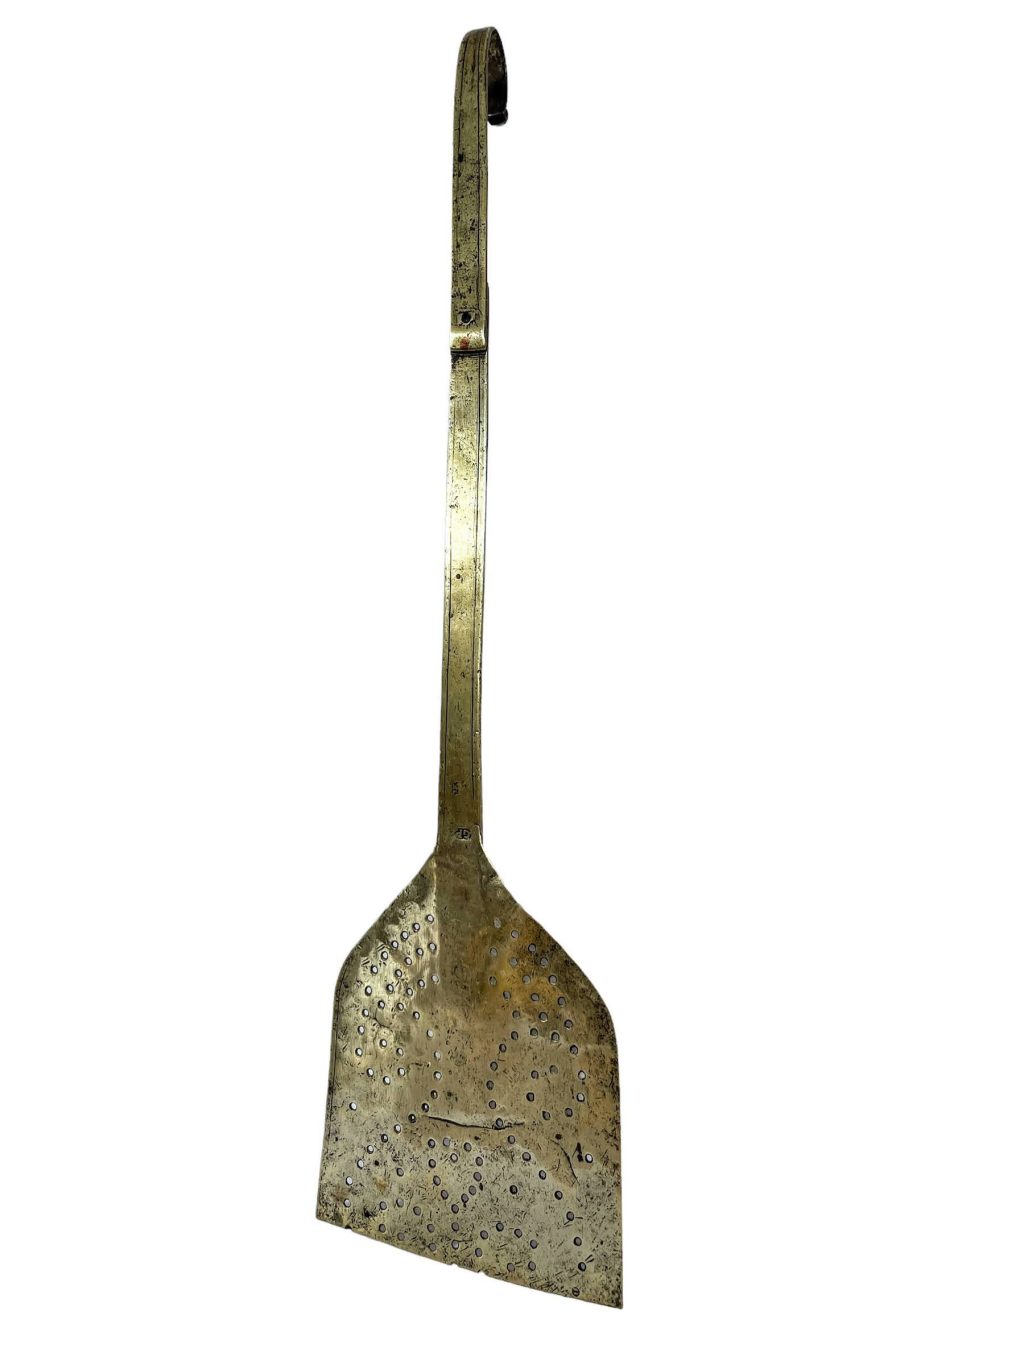 Antique Brass French Crepe Pancake Galette Bread Oven Scoop Spatula Cooking Baking circa 1910’s / EVE